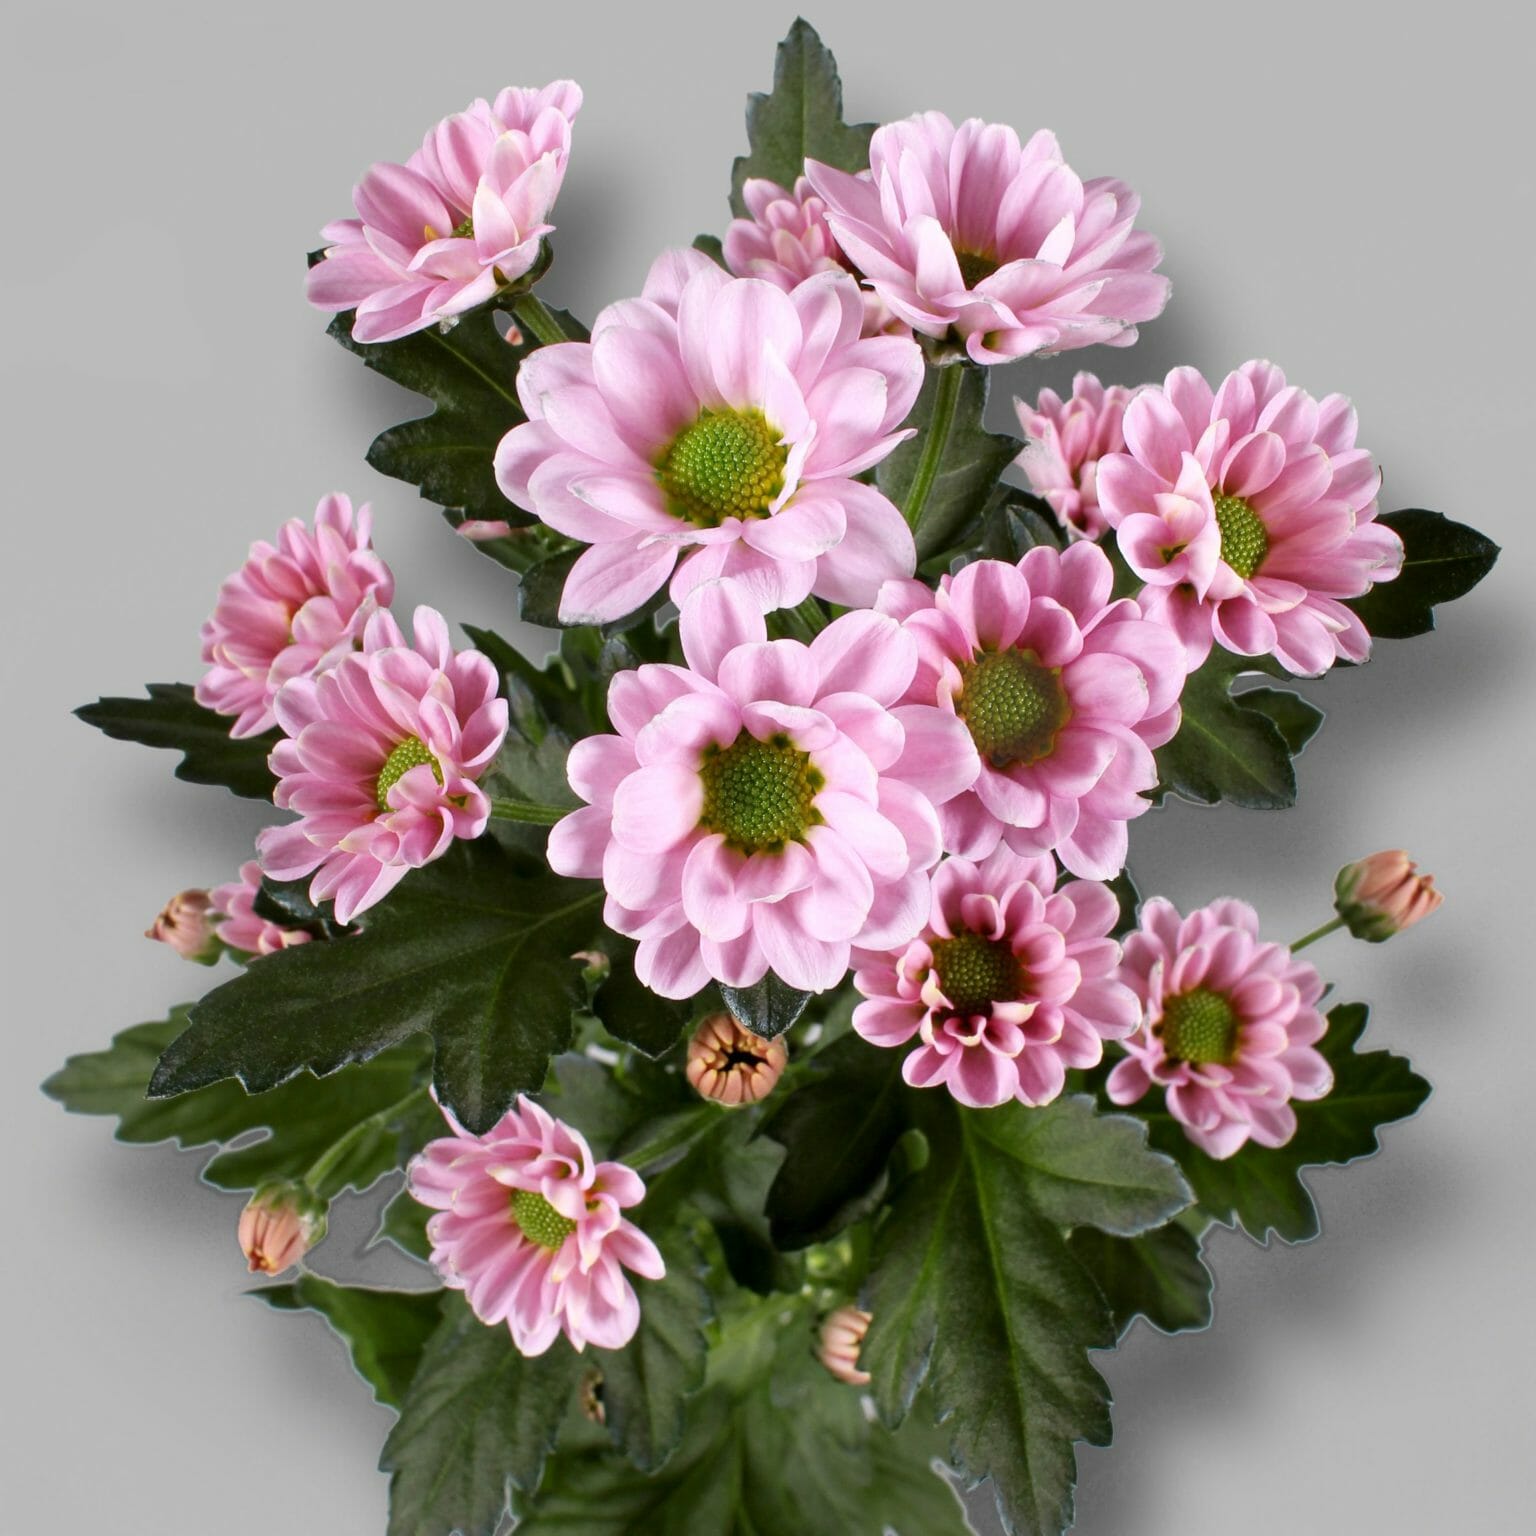 Chrysant Pink Mix in paper look